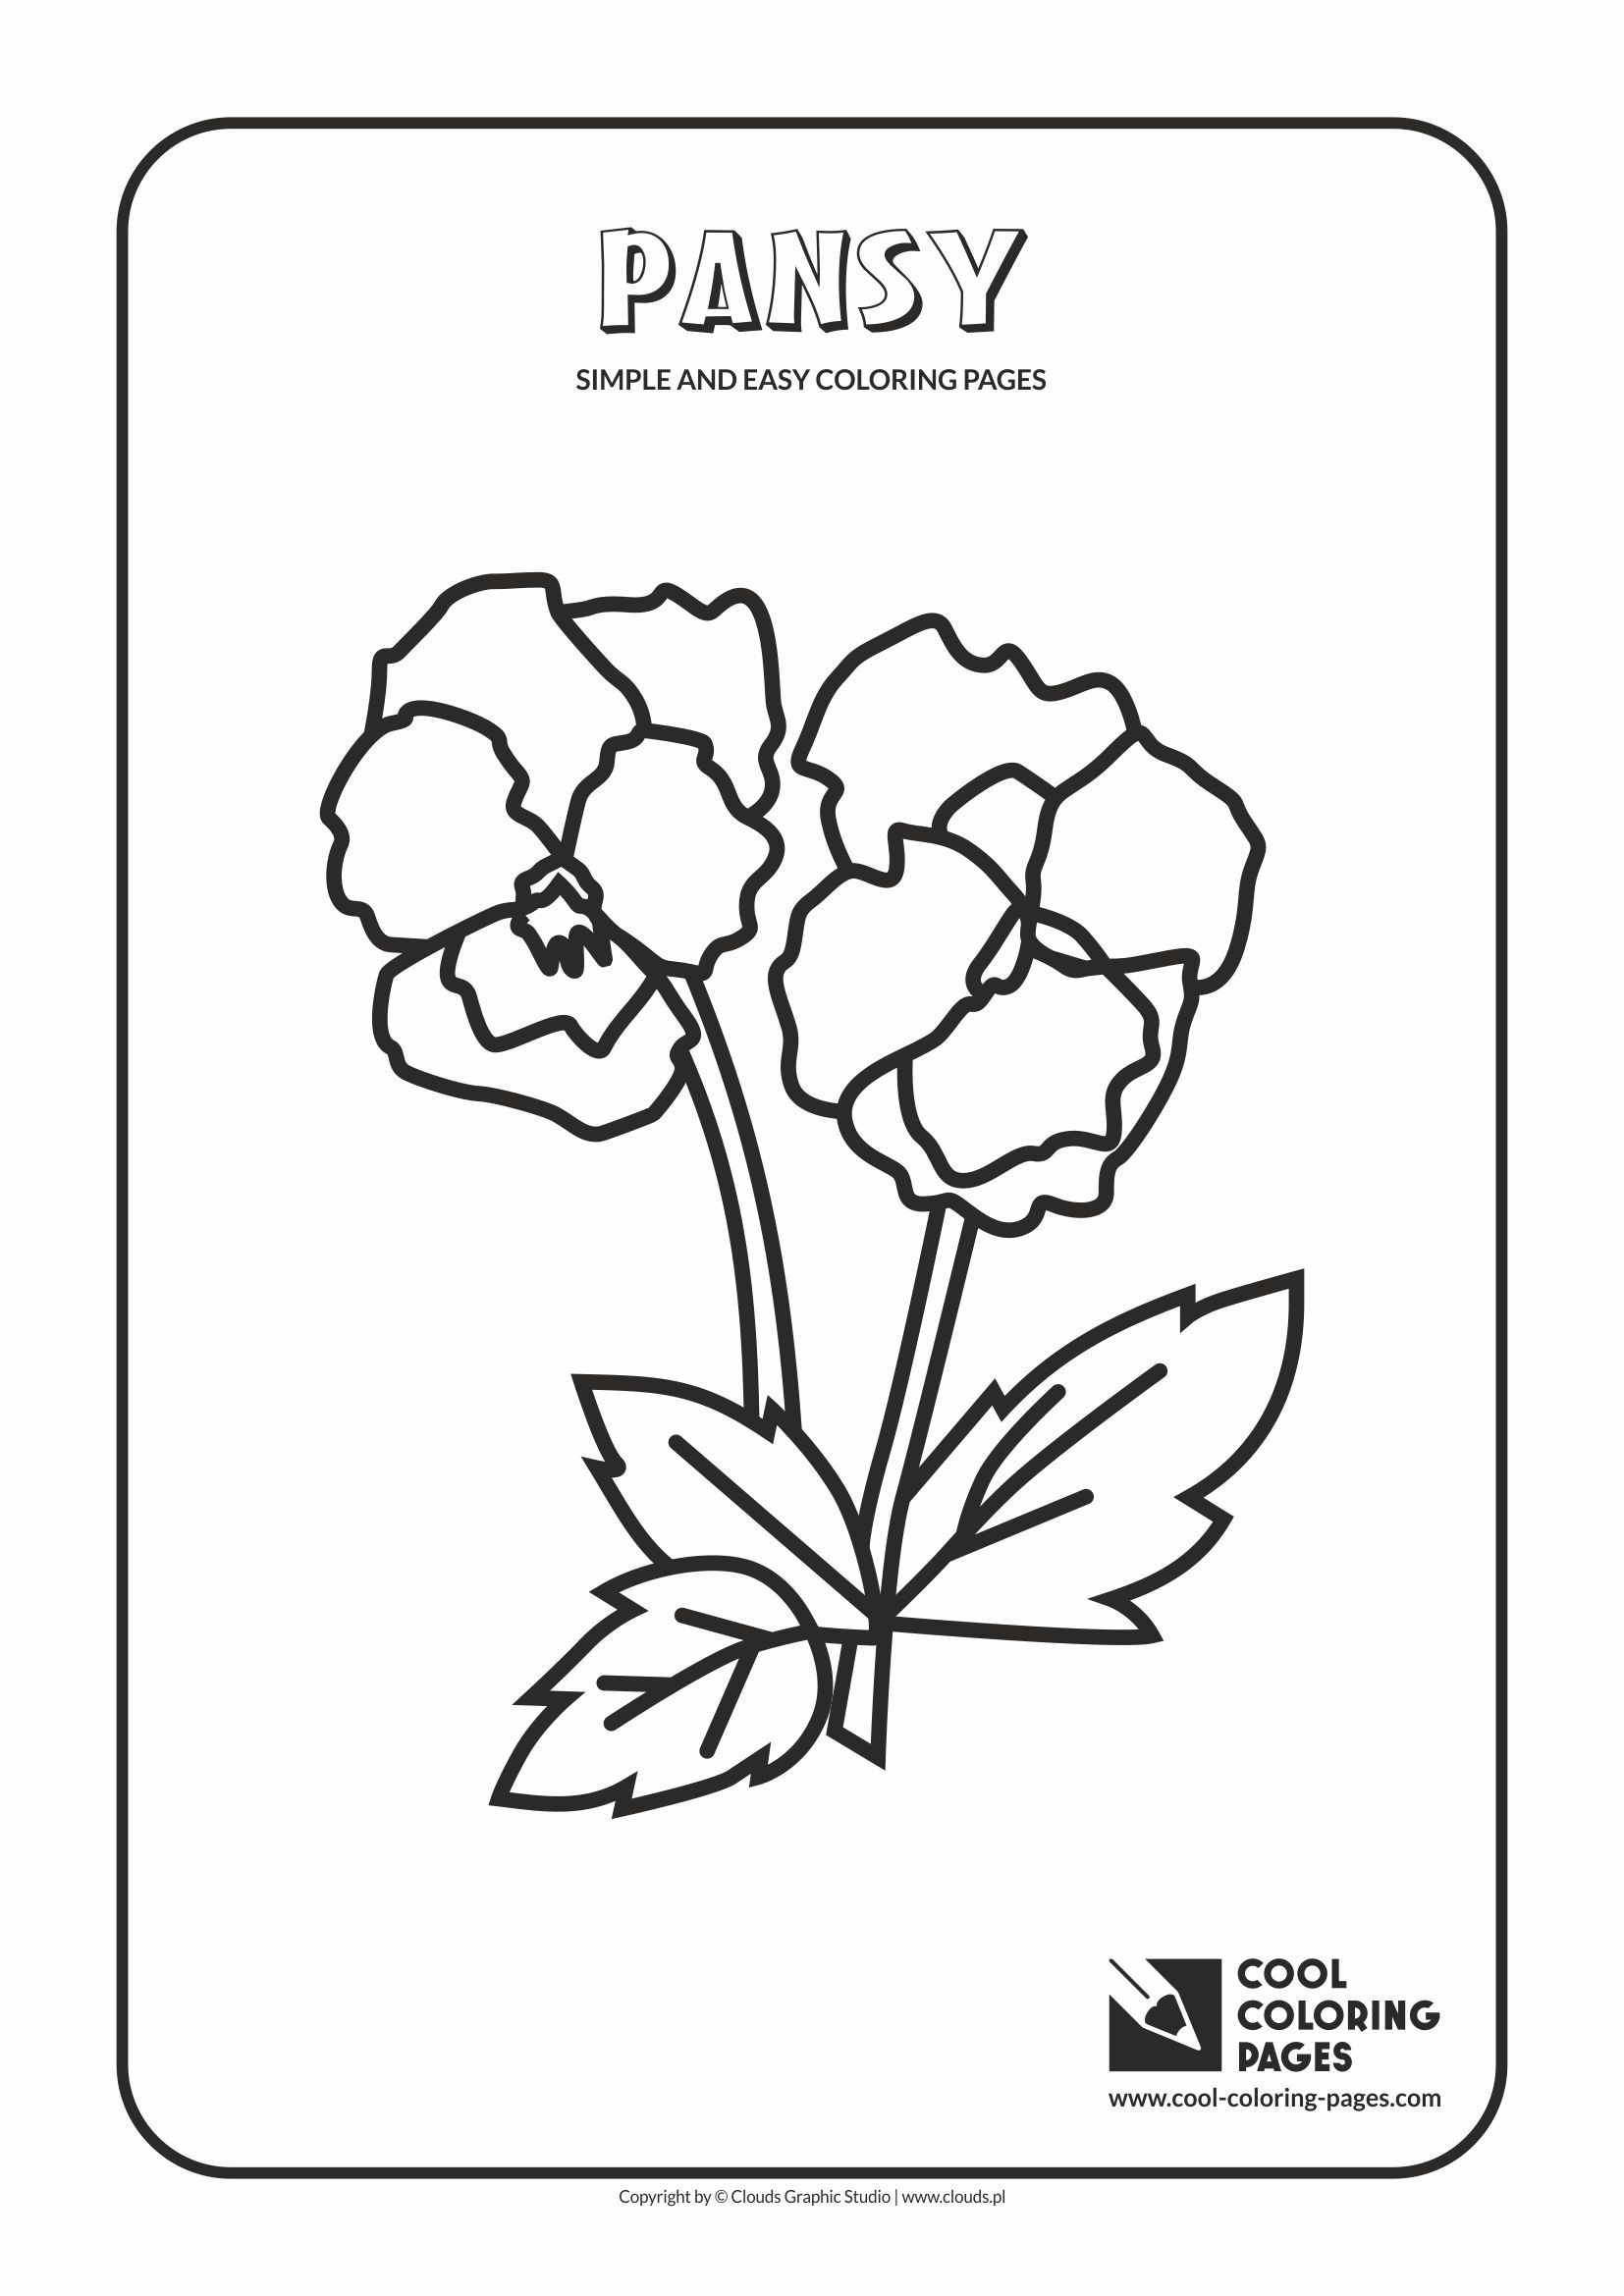 Simple and easy coloring pages for toddlers - Pansy